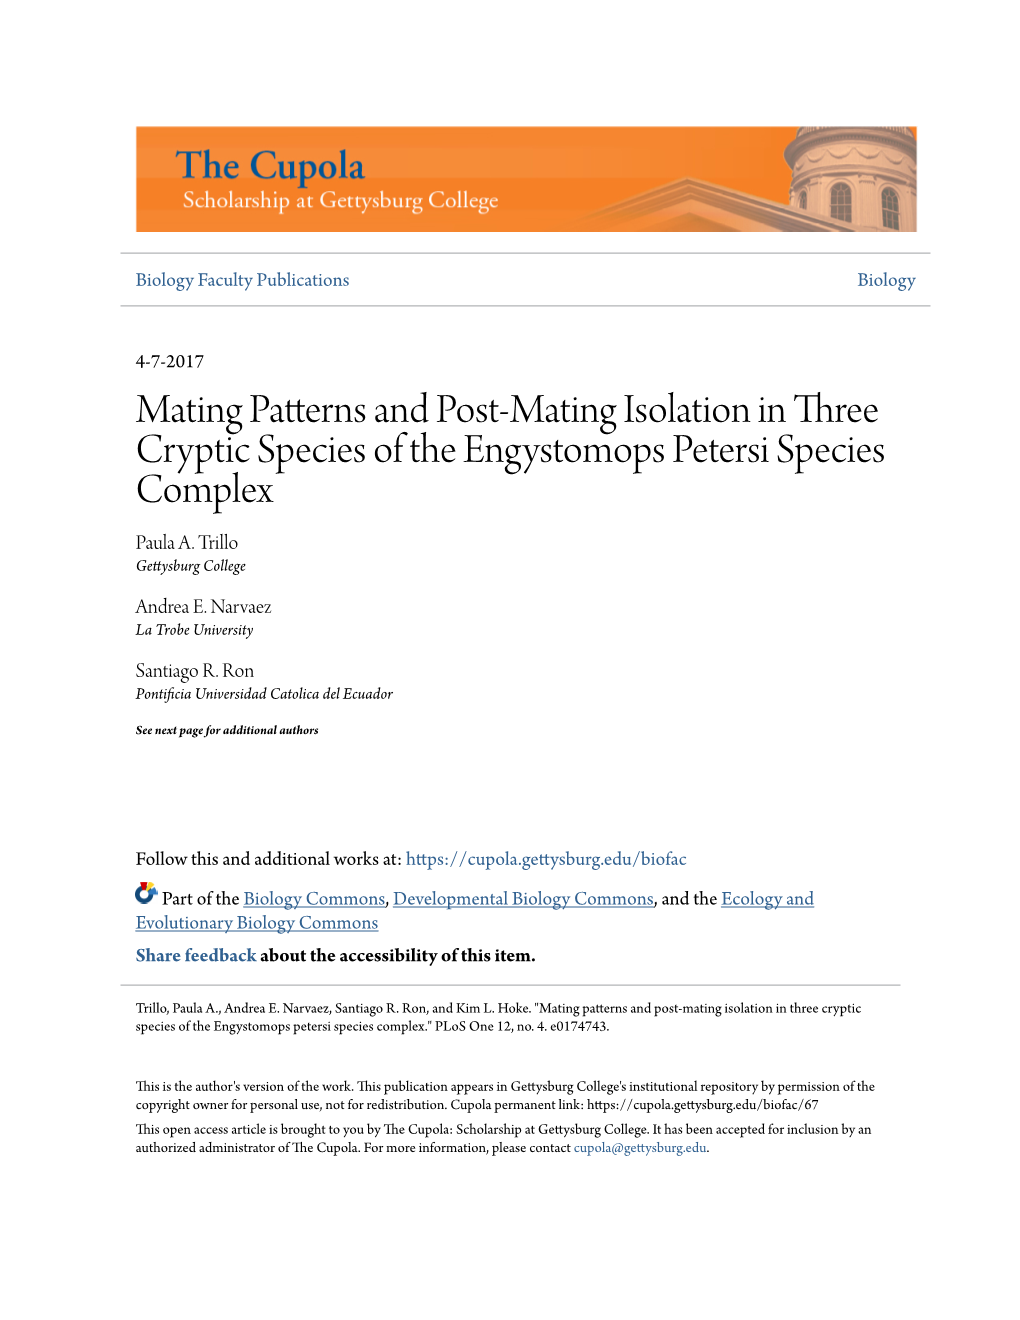 Mating Patterns and Post-Mating Isolation in Three Cryptic Species of the Engystomops Petersi Species Complex Paula A